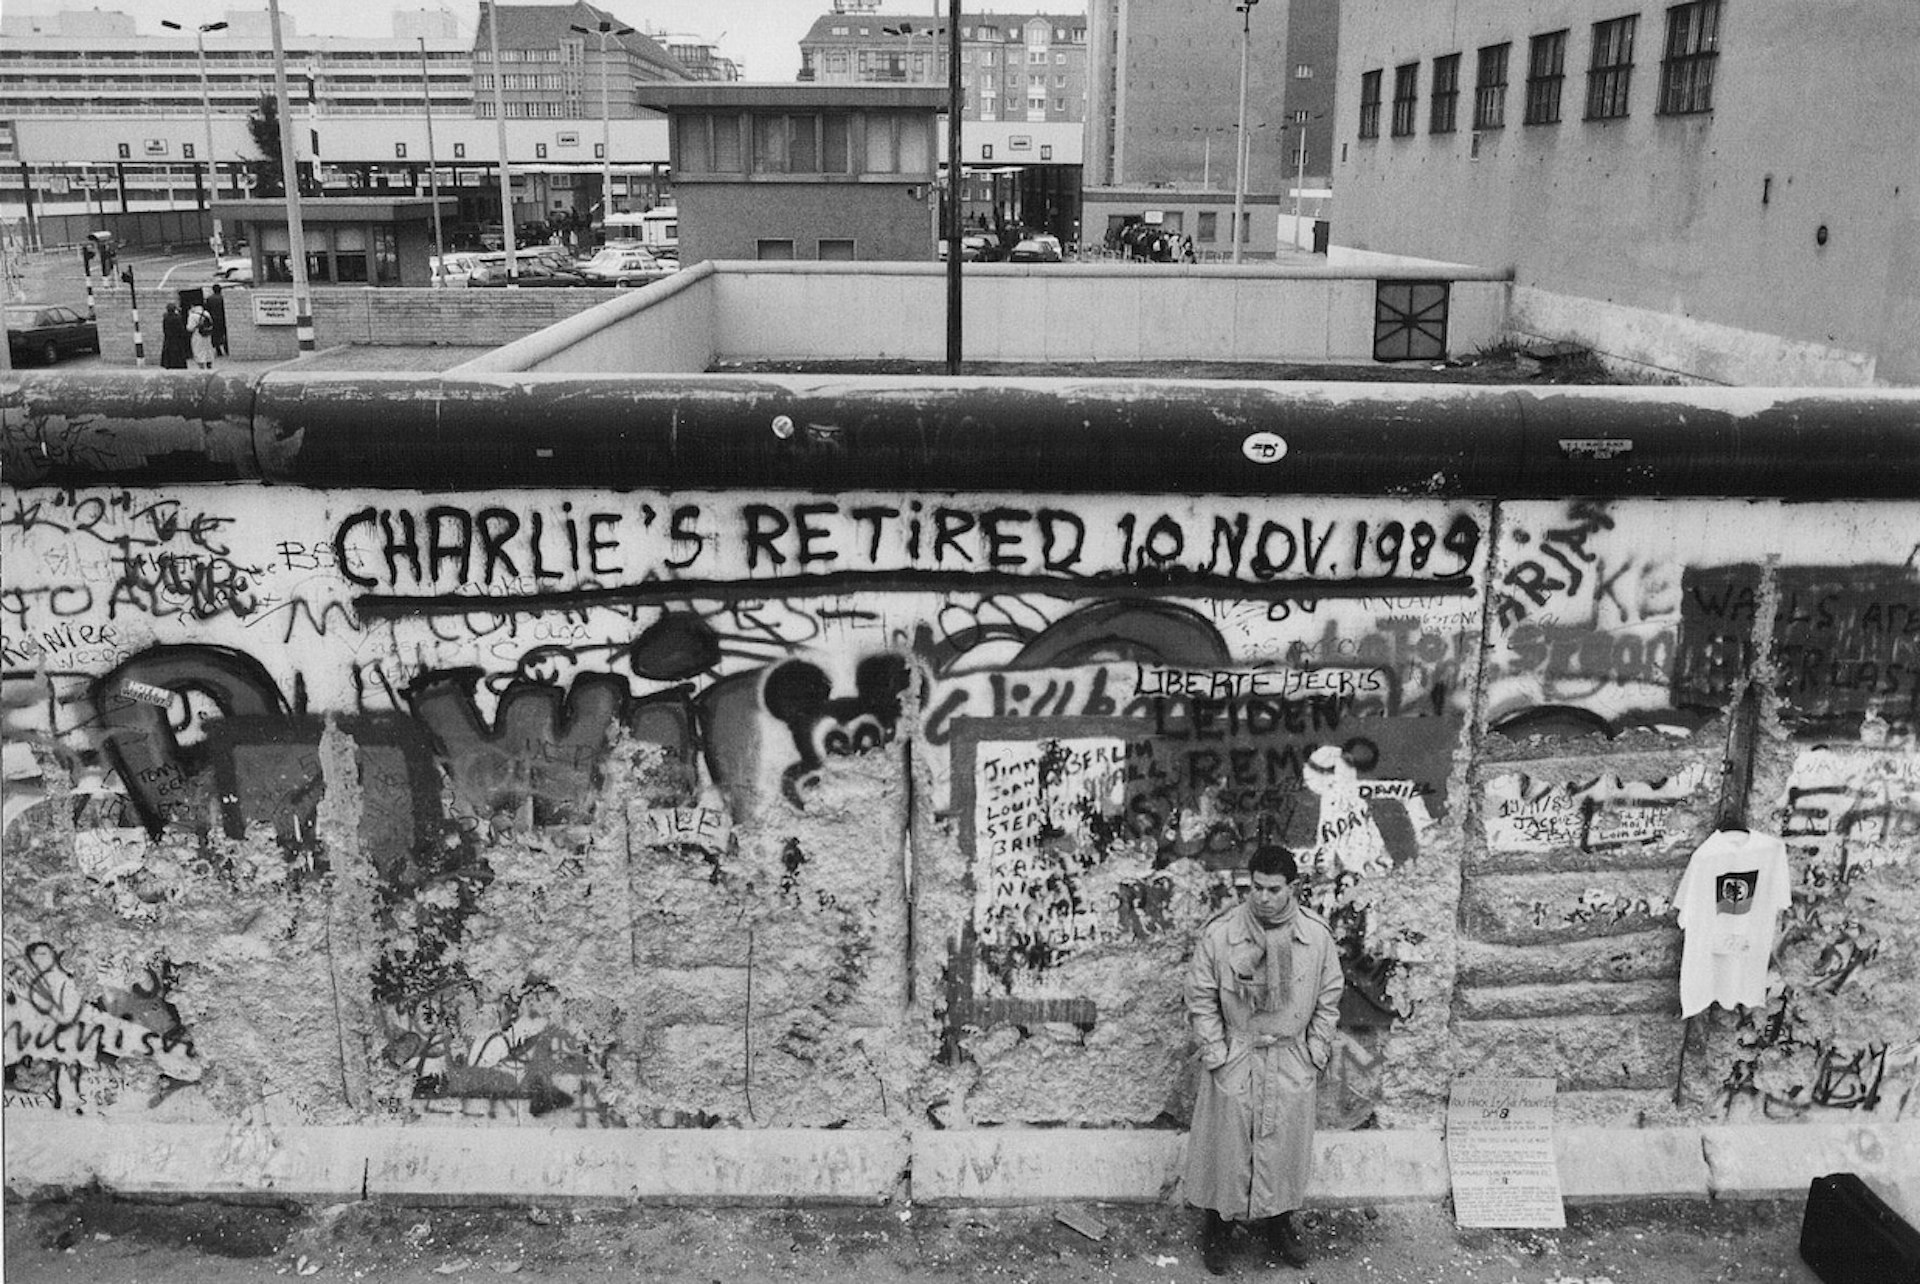 Gritty scenes from the final days of the Berlin Wall